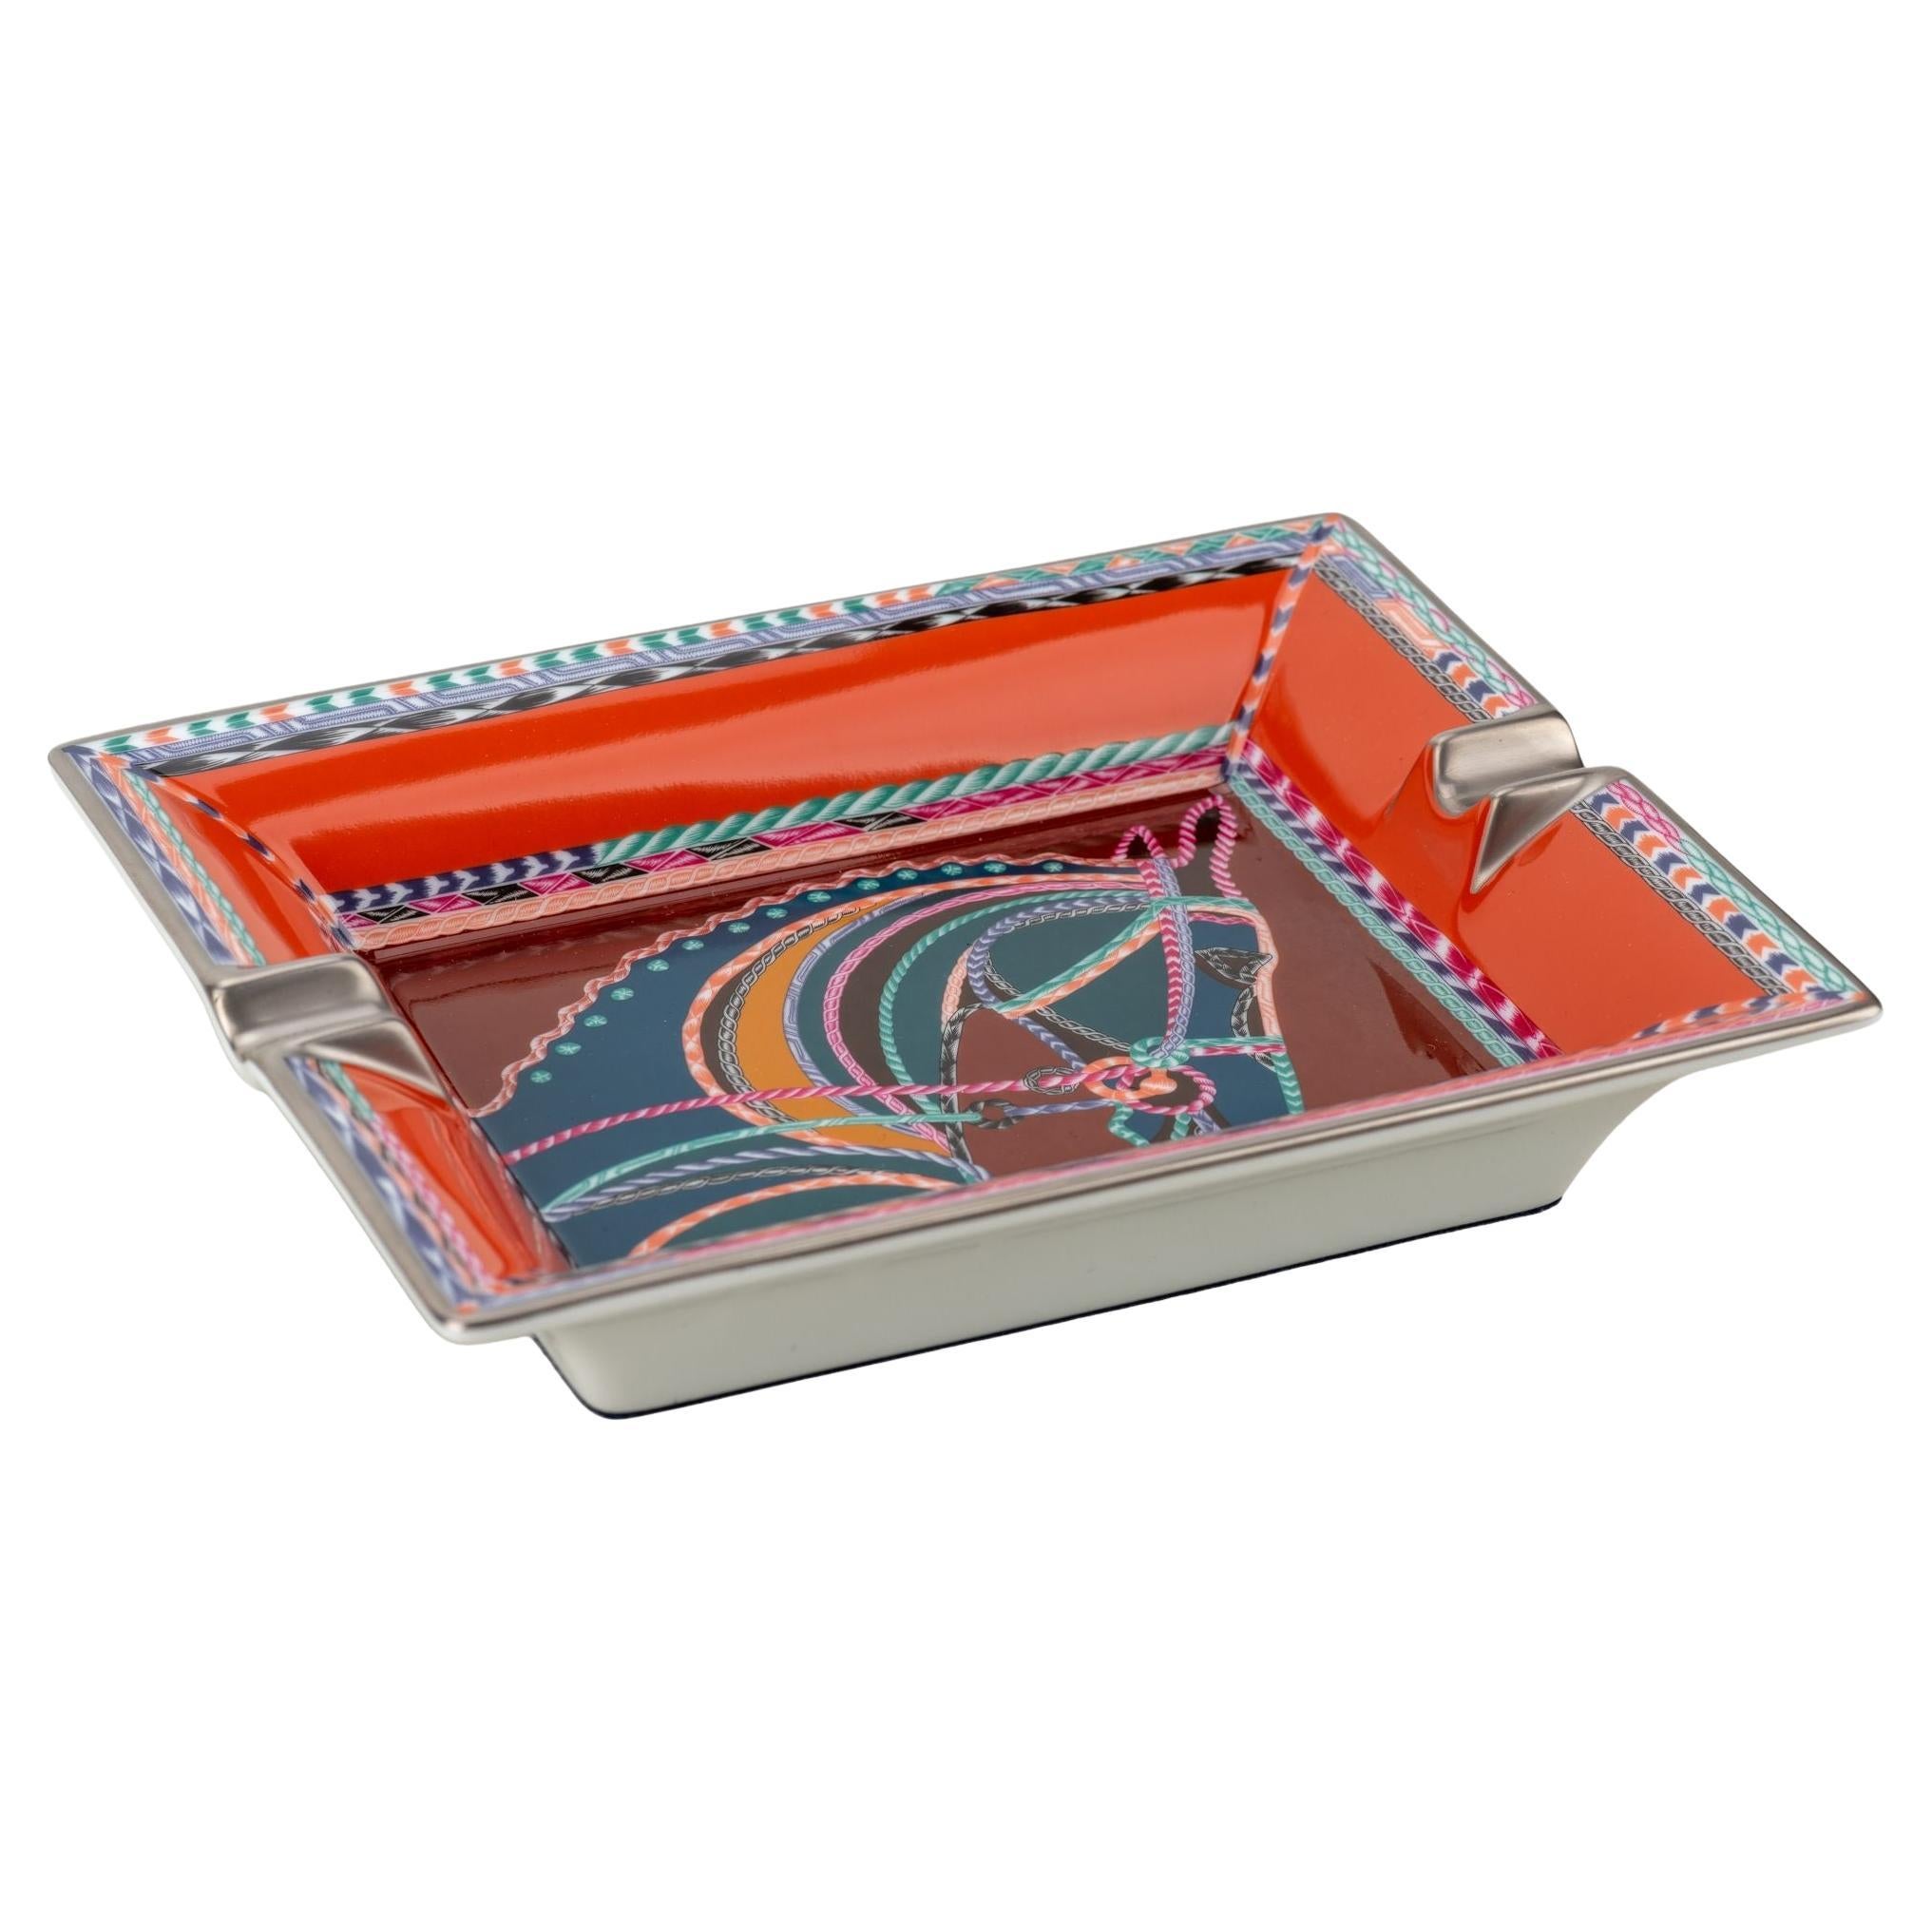 Hermès new red and multicolor porcelain ashtray with horse head design.
Comes with original box.